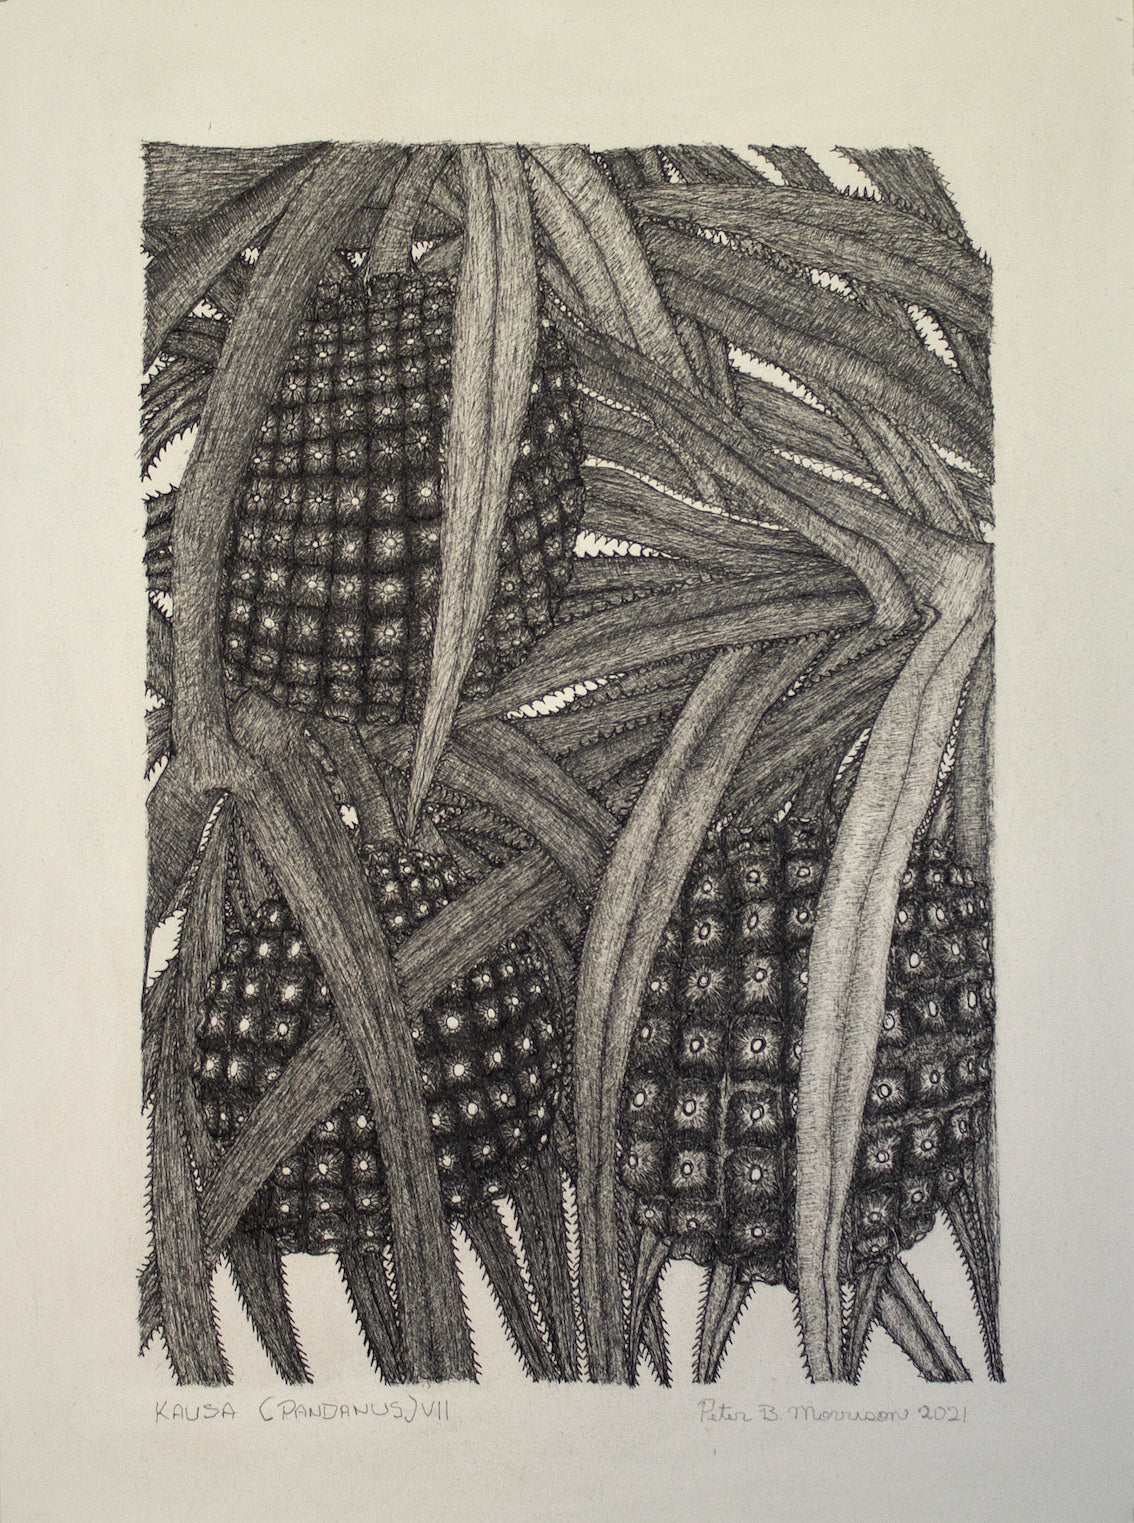 PETER B MORRISON | 'Kausa (Pandanus) VII' Drawing | Pen and ink on archival paper